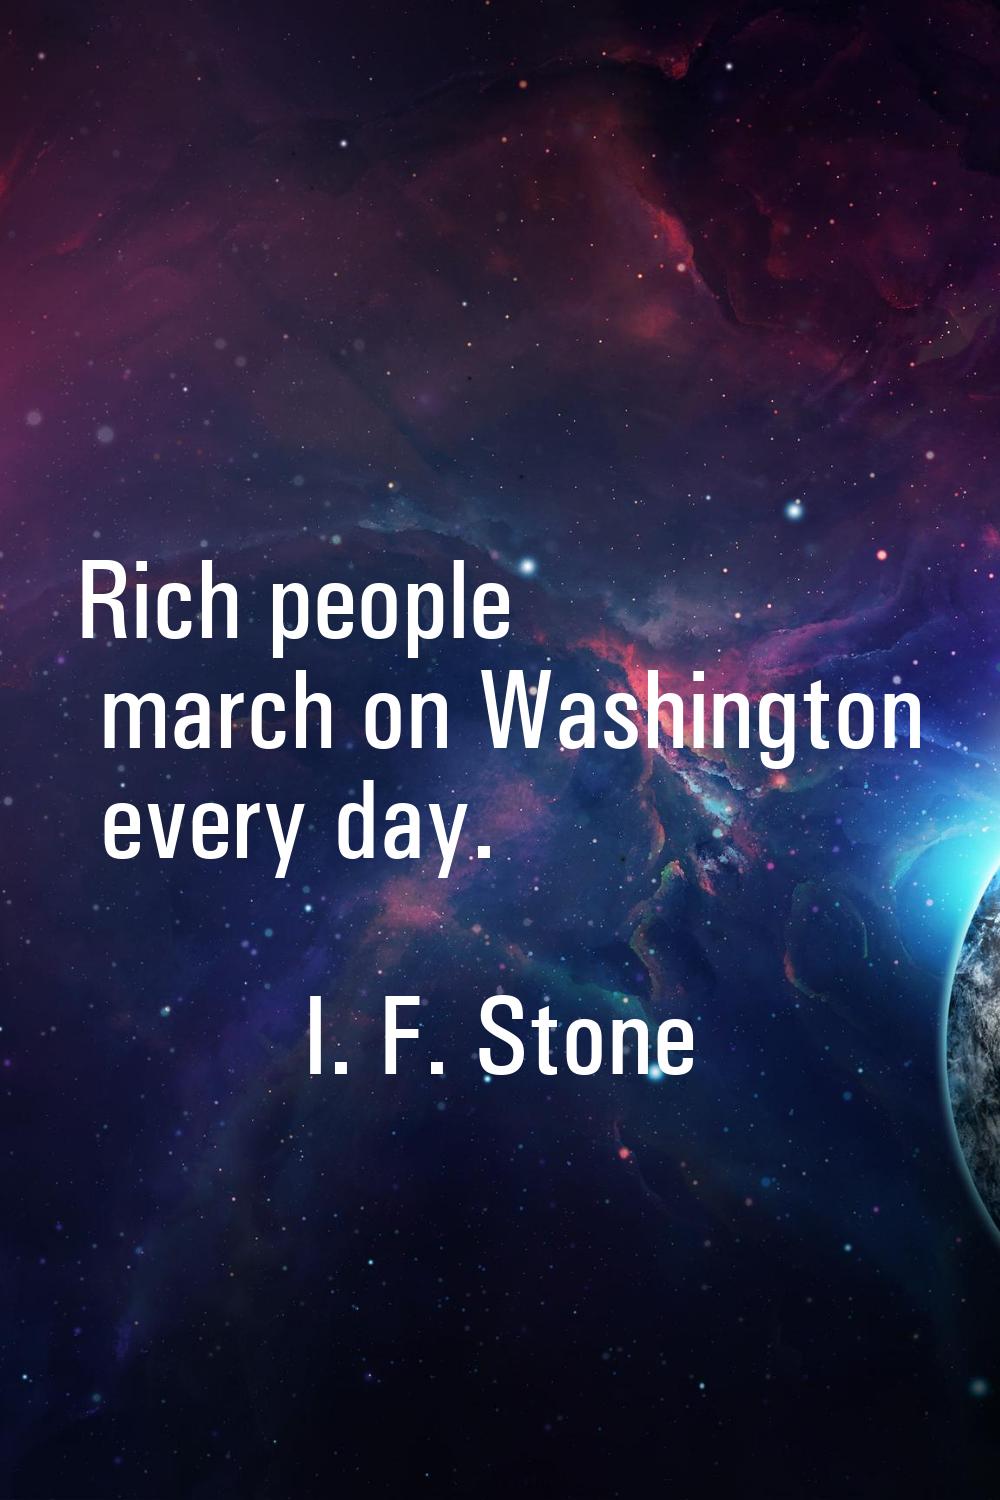 Rich people march on Washington every day.